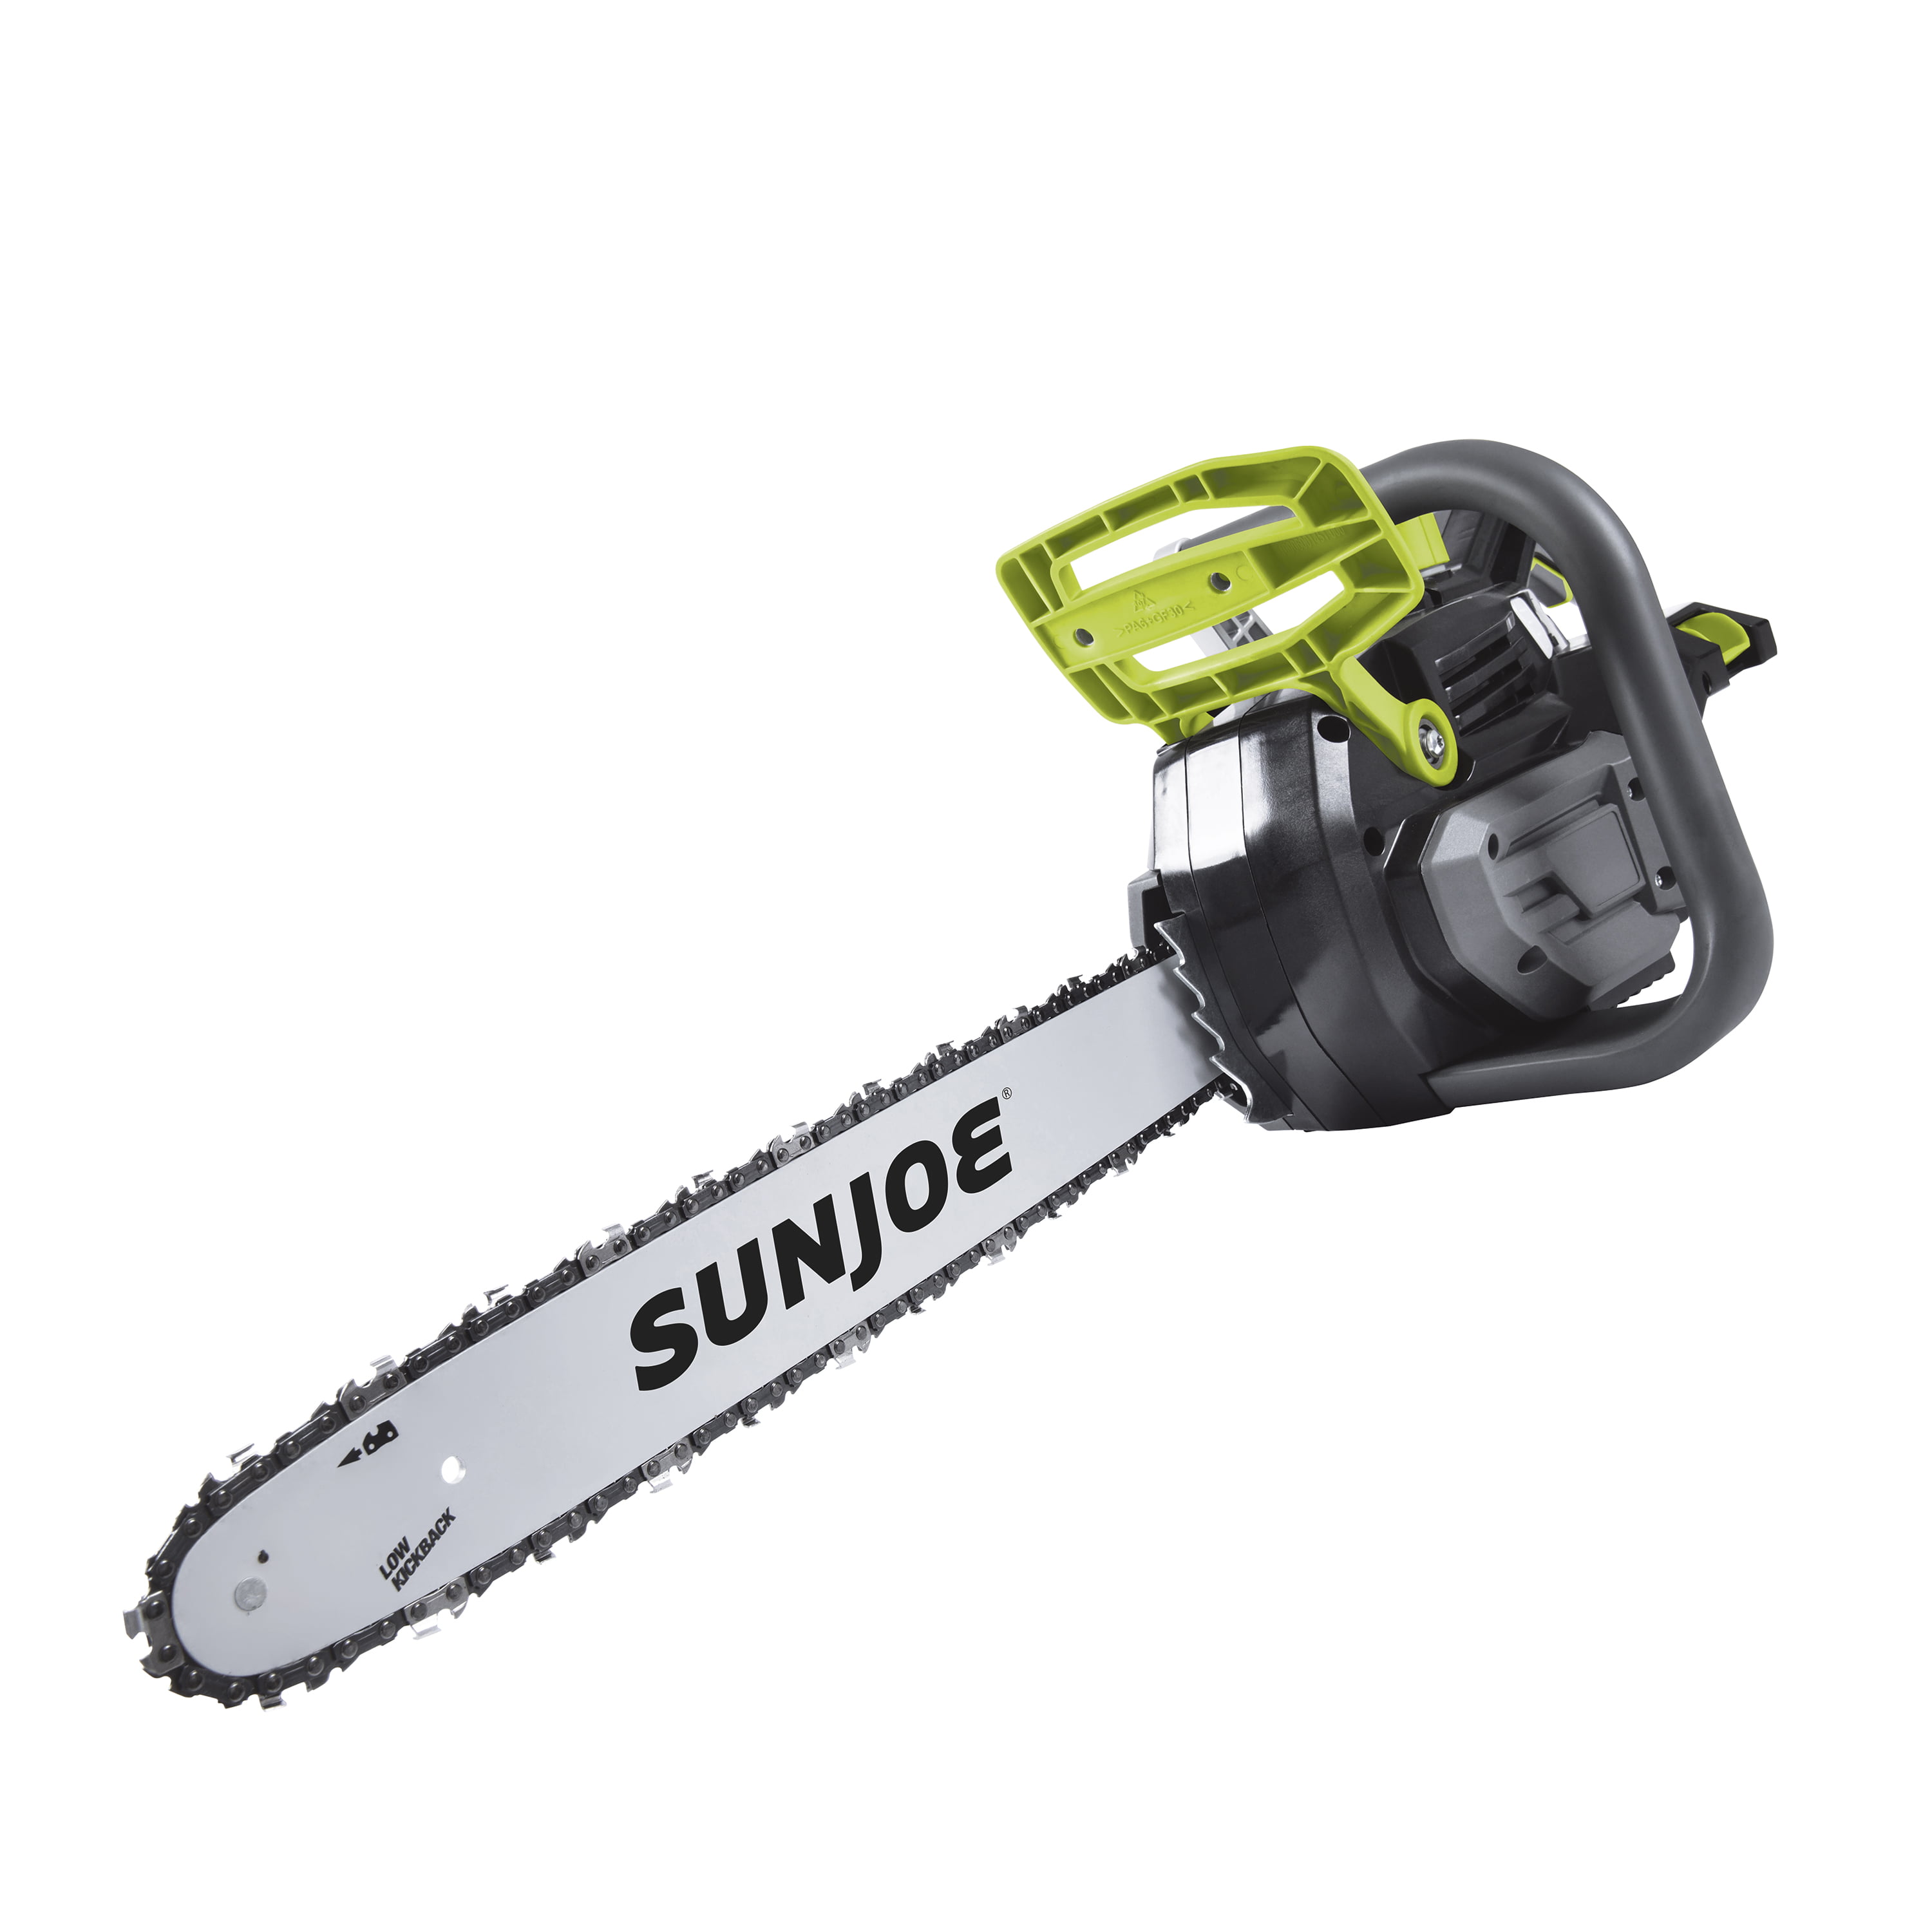 Electric Chainsaw Under 100 Dollars 